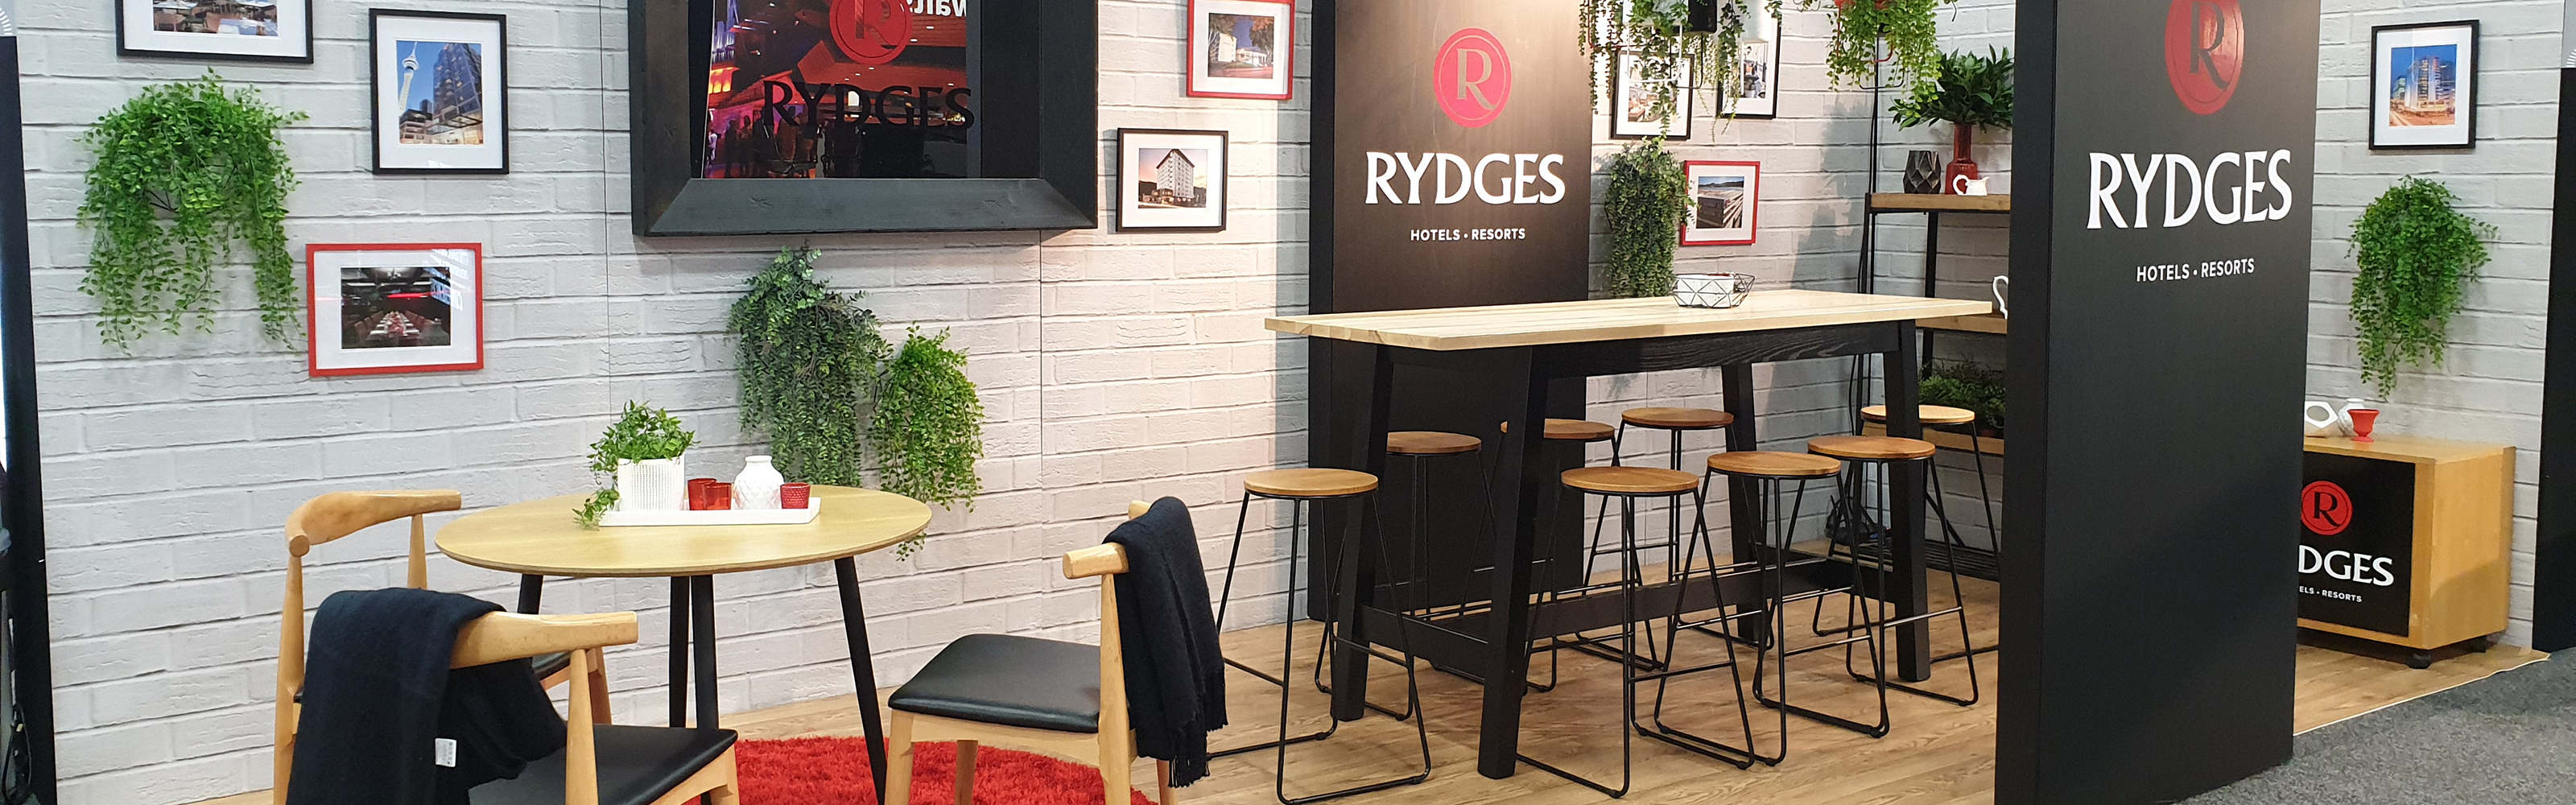 Cut the Mustard Exhibition Design // Rydges Hotels & Resorts, MEETINGS 2019